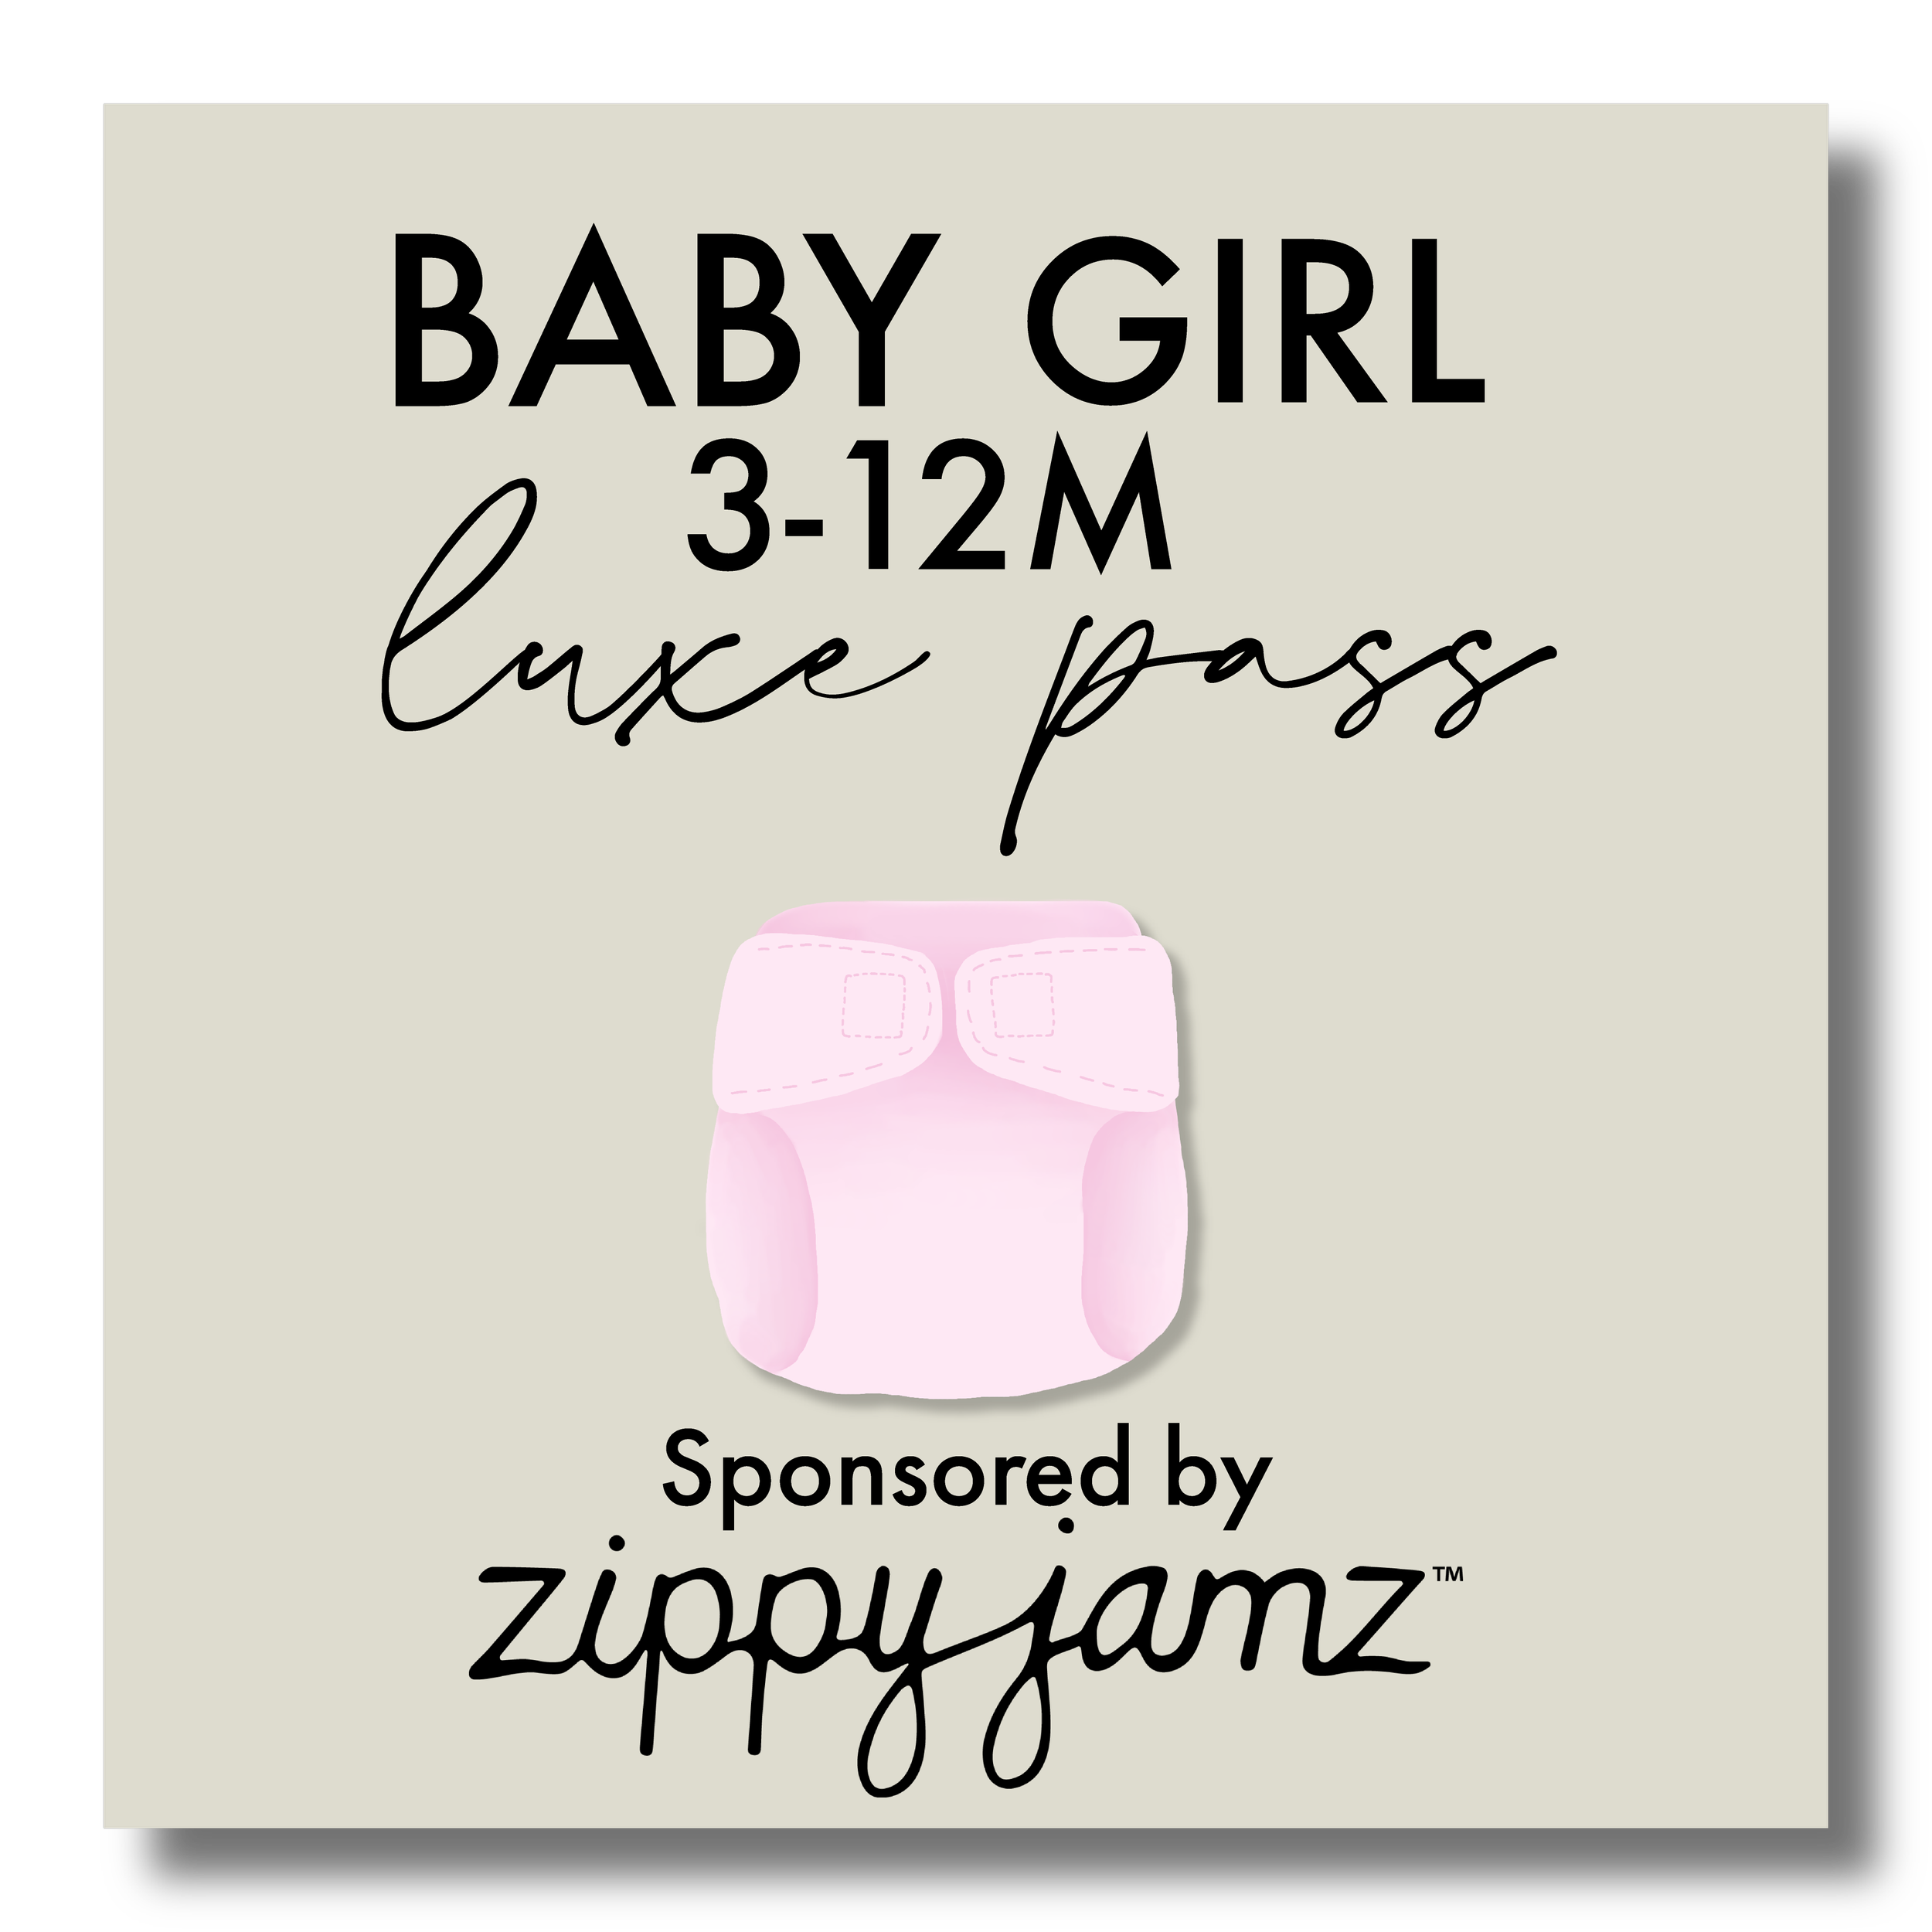 Baby Girl Luxe@2x.png